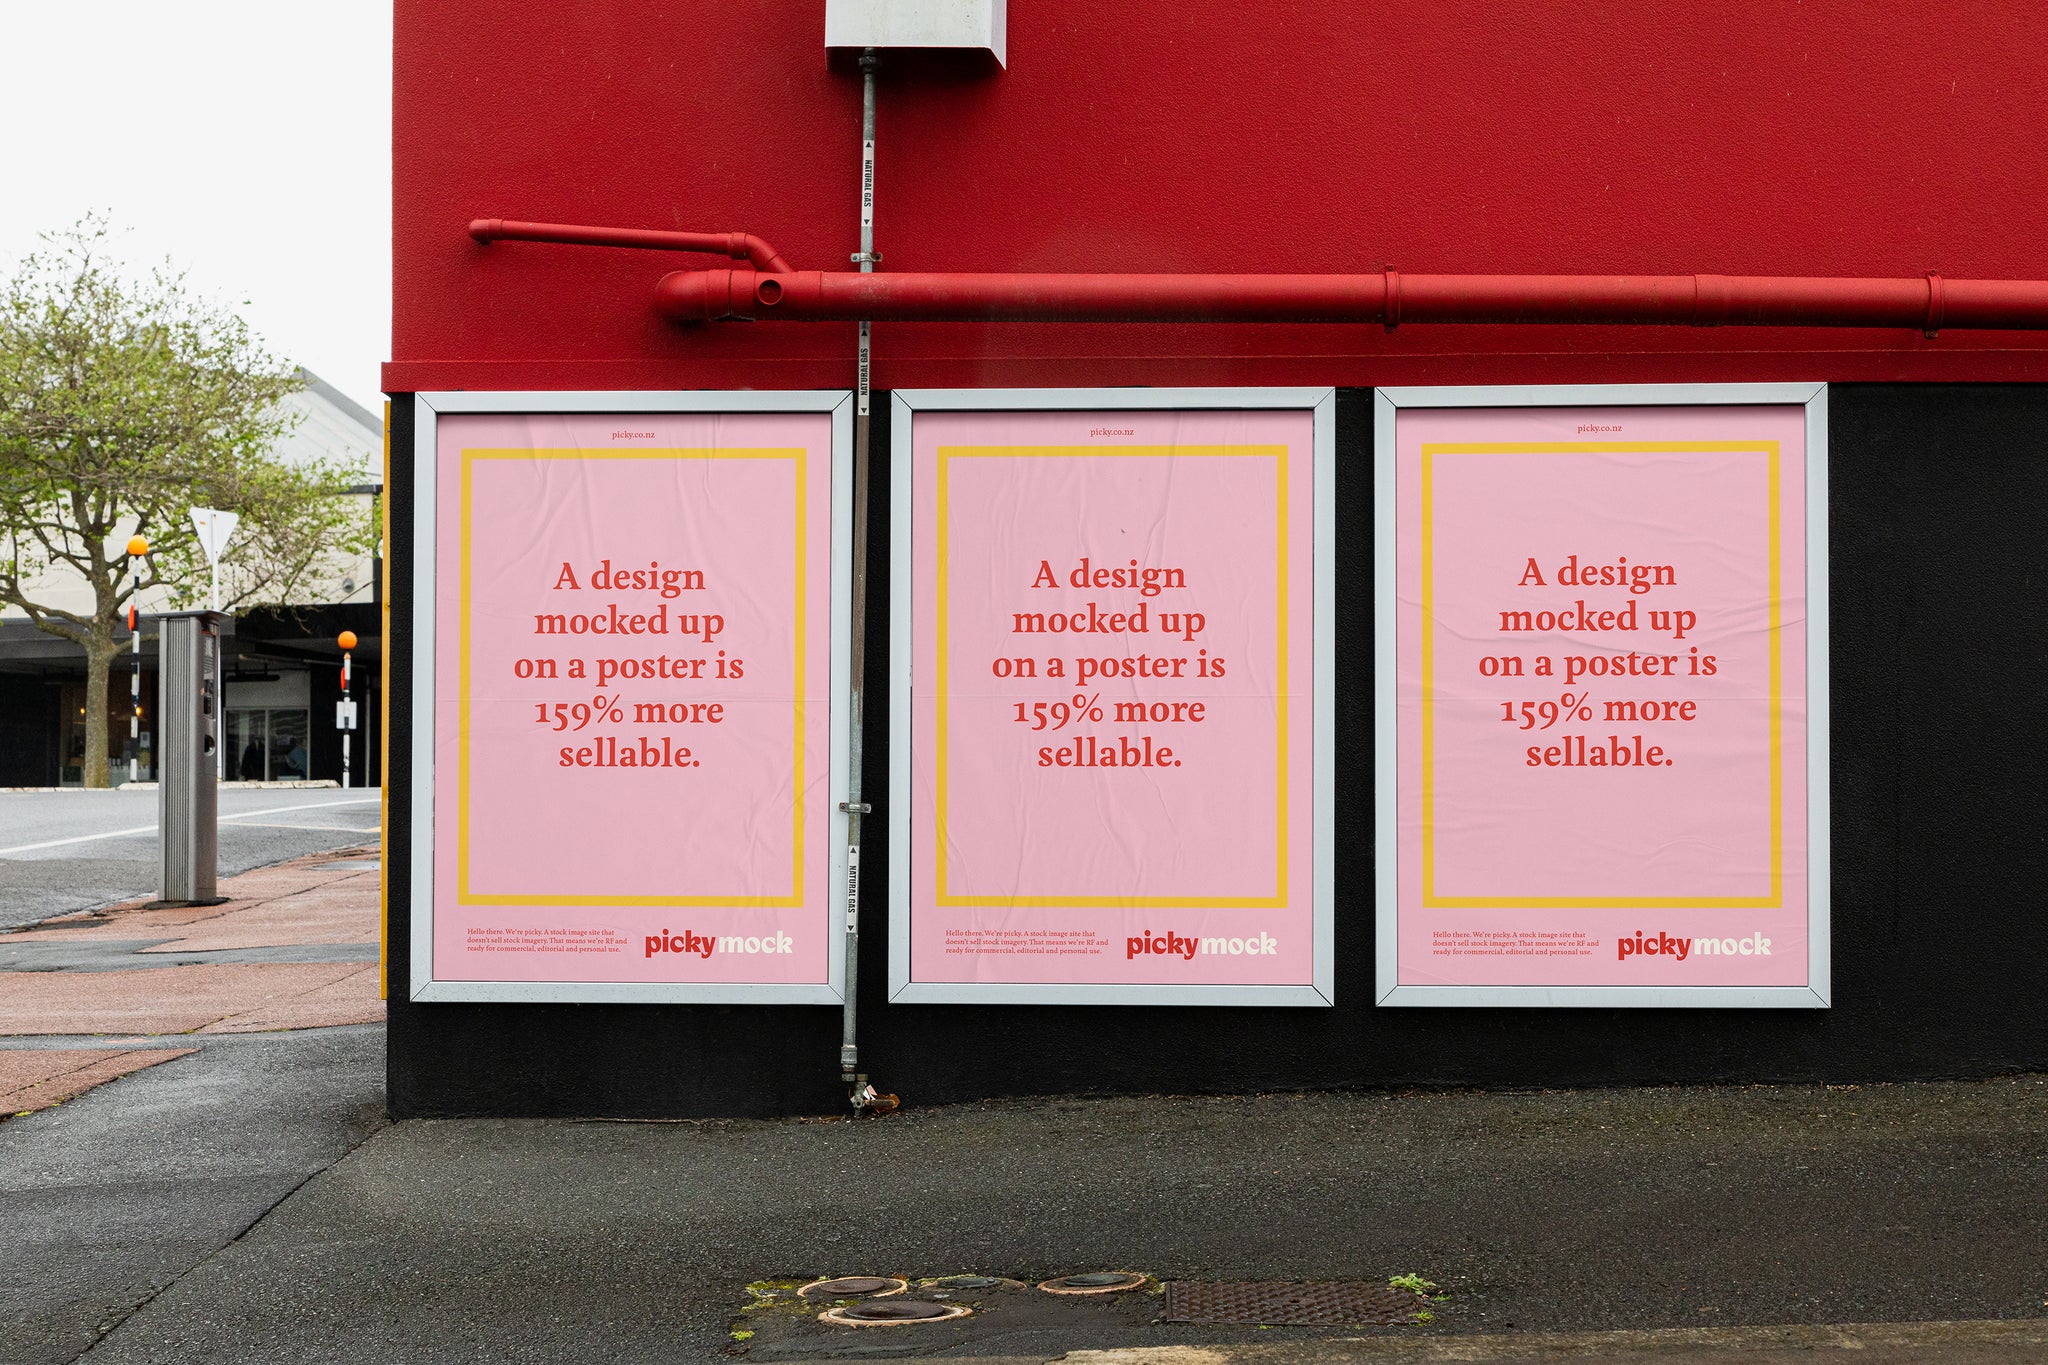 Three street posters sit in white frames, against a red and black wall.